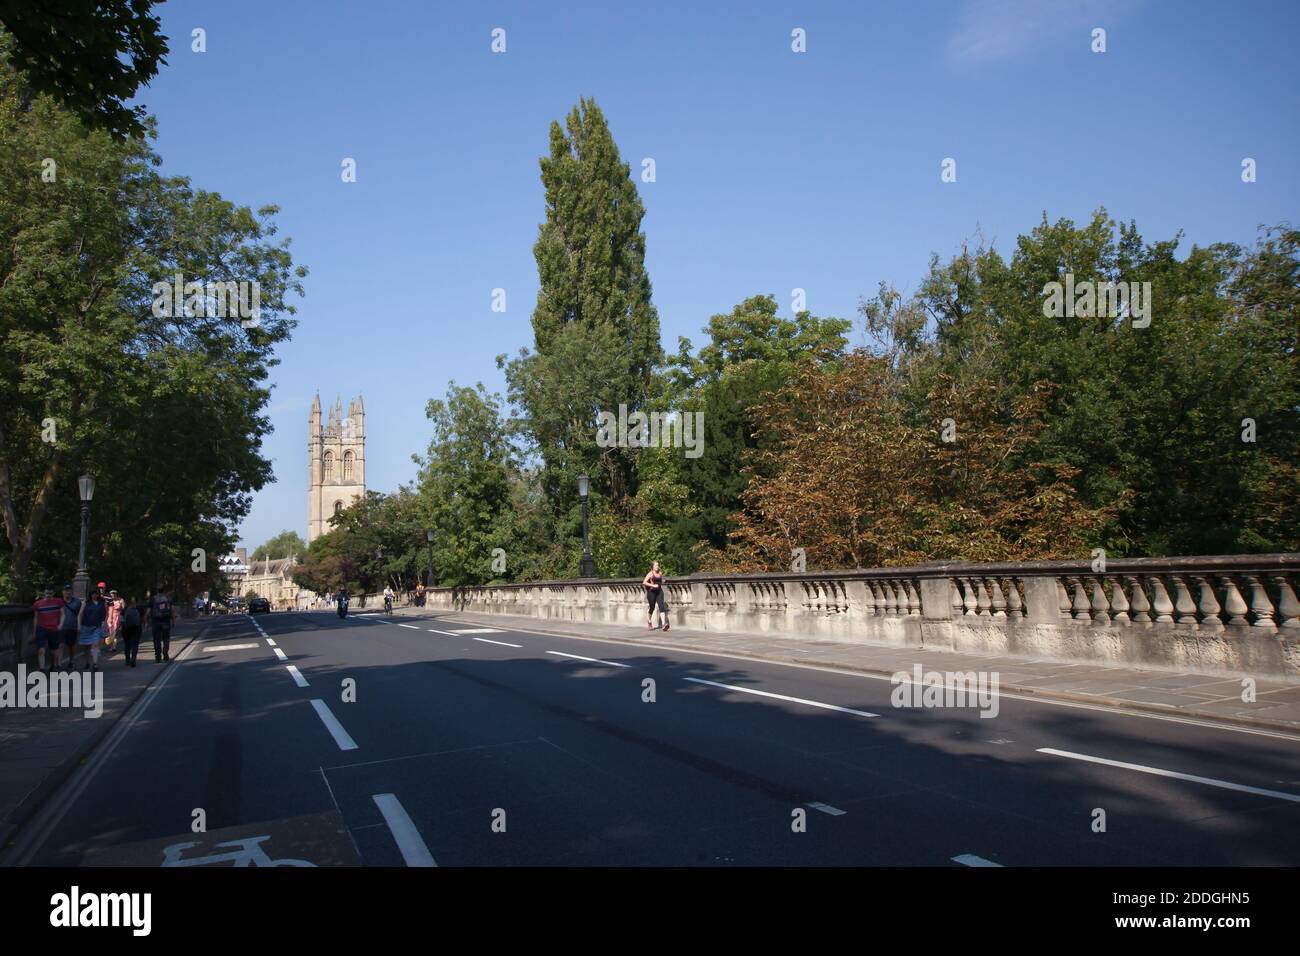 Views along Magdalen Bridge on Oxford High Street in the UK, taken on the 15th of September 2020 Stock Photo